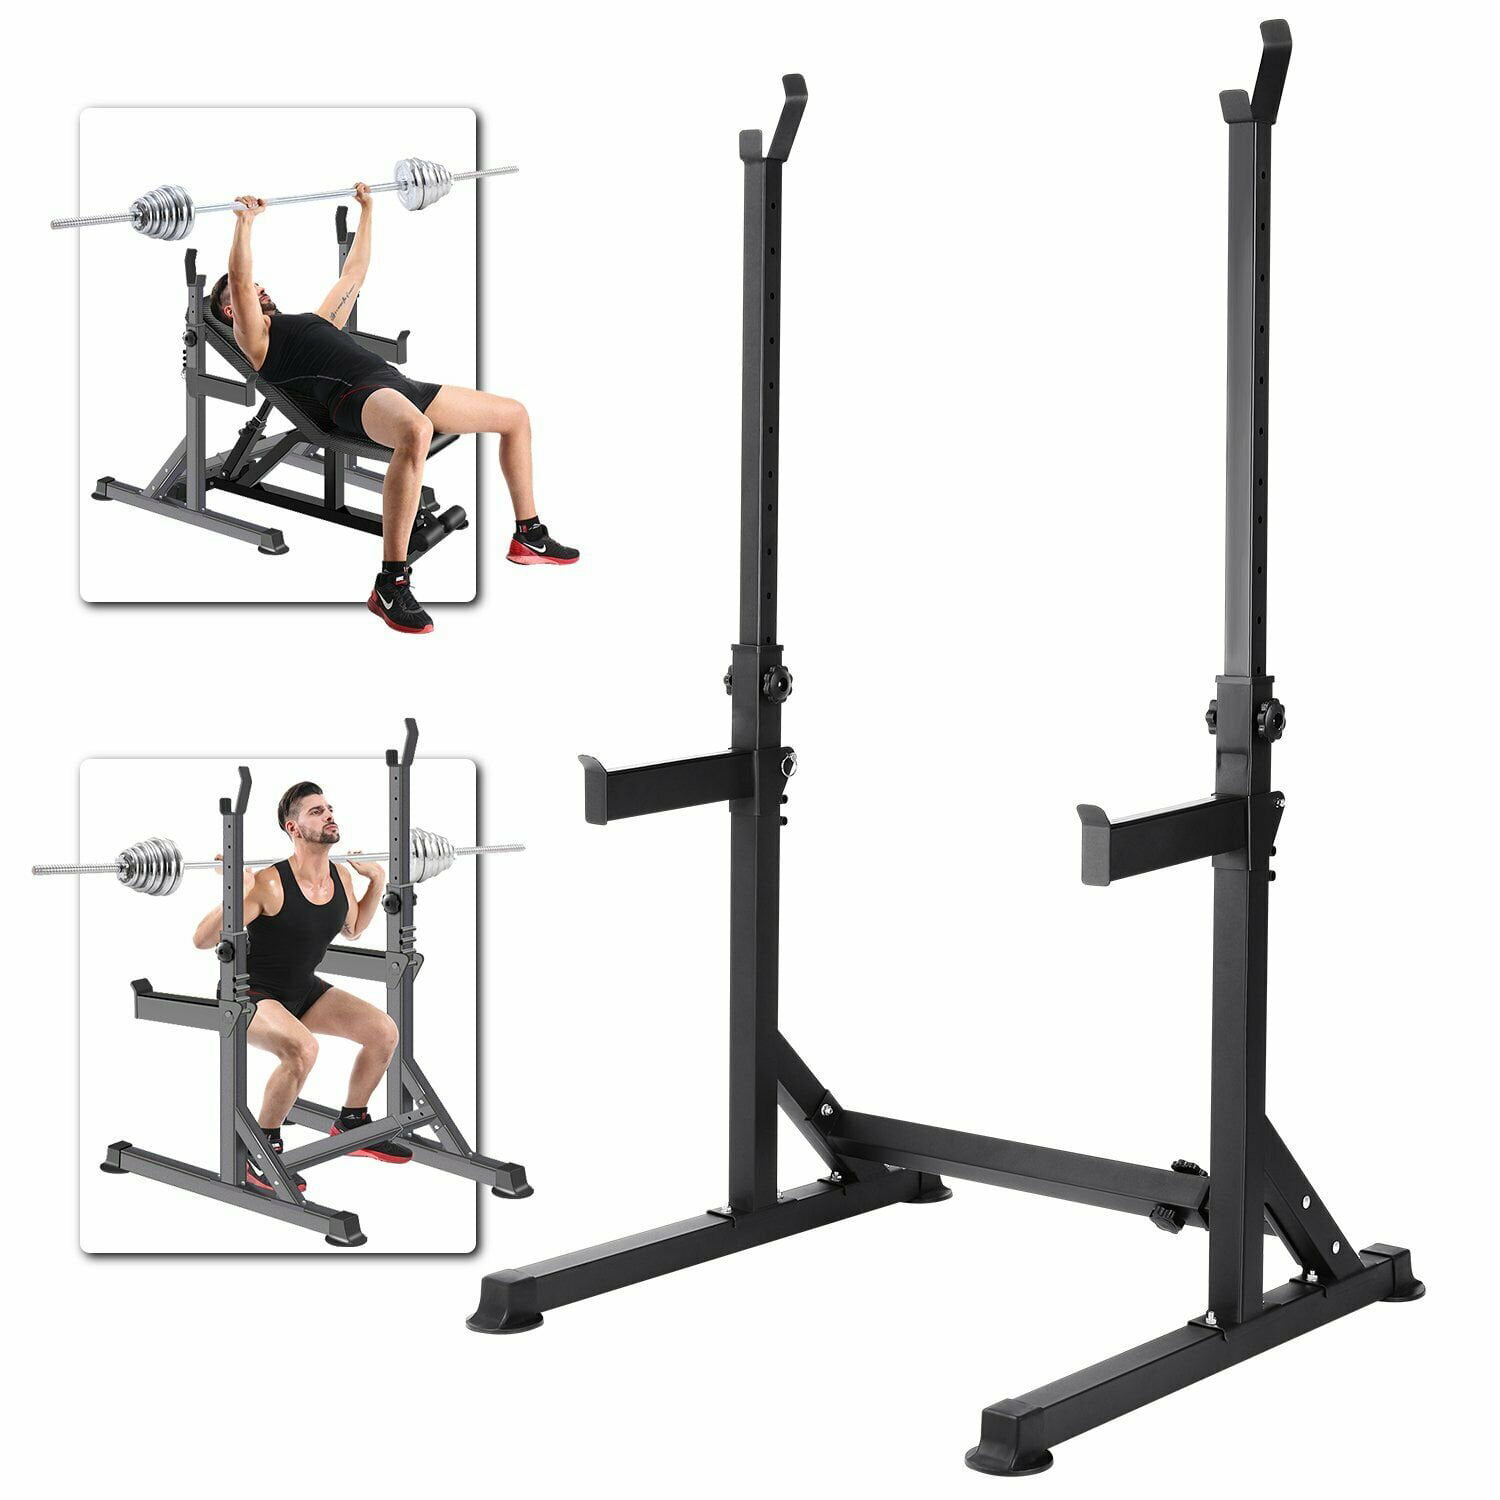 white+black Adjustable Squat Rack Stand Barbell Rack 52in Weight Lifting Bench Free Press Stand,Dip Stand for Home Gym Multi-Function Fitness 580LBS Max Load 